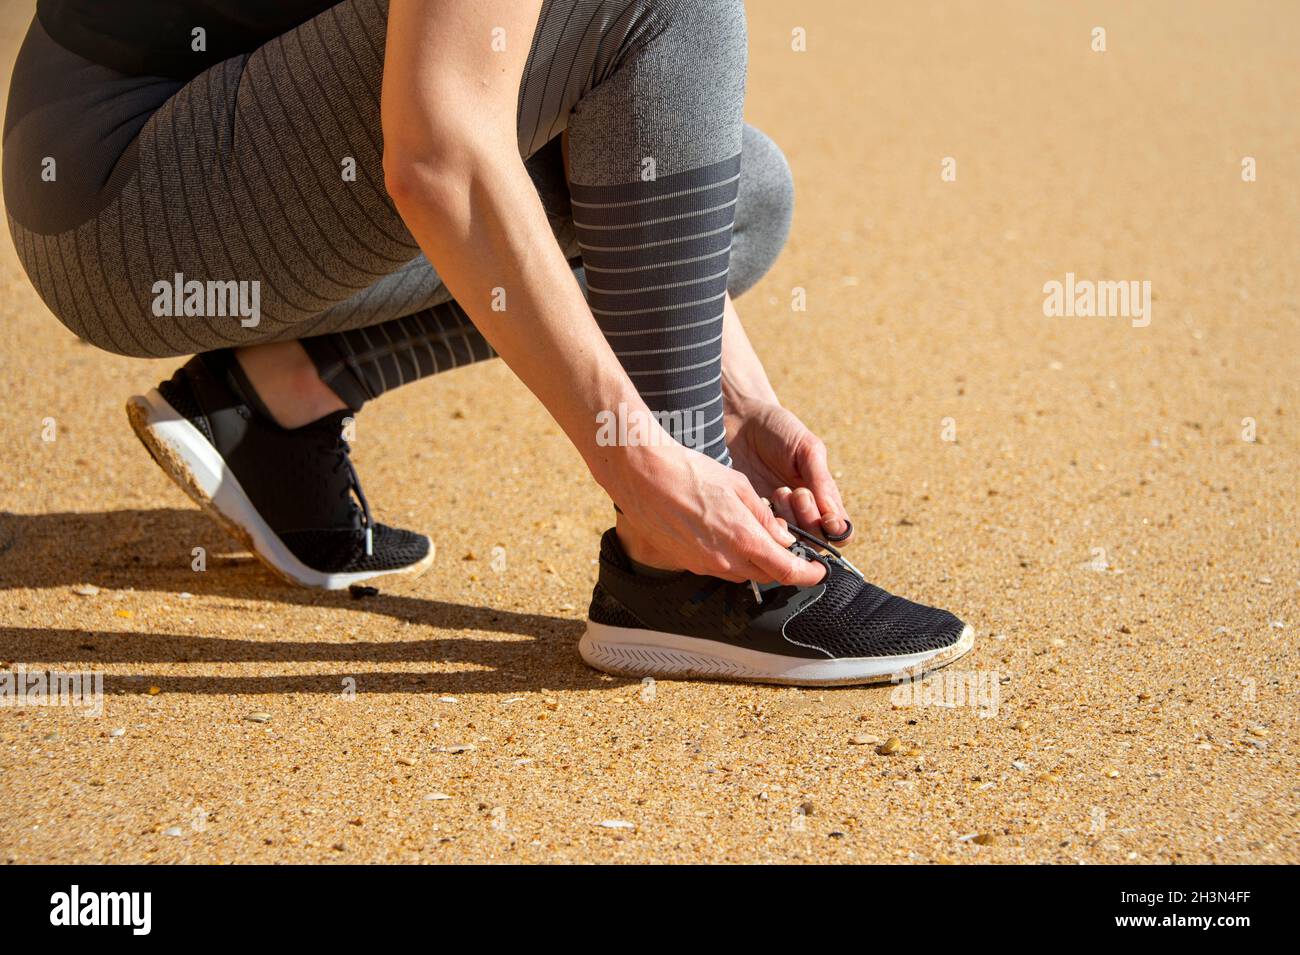 Close up of a sporty woman tying up her shoelaces on her running shoes on sand. Stock Photo